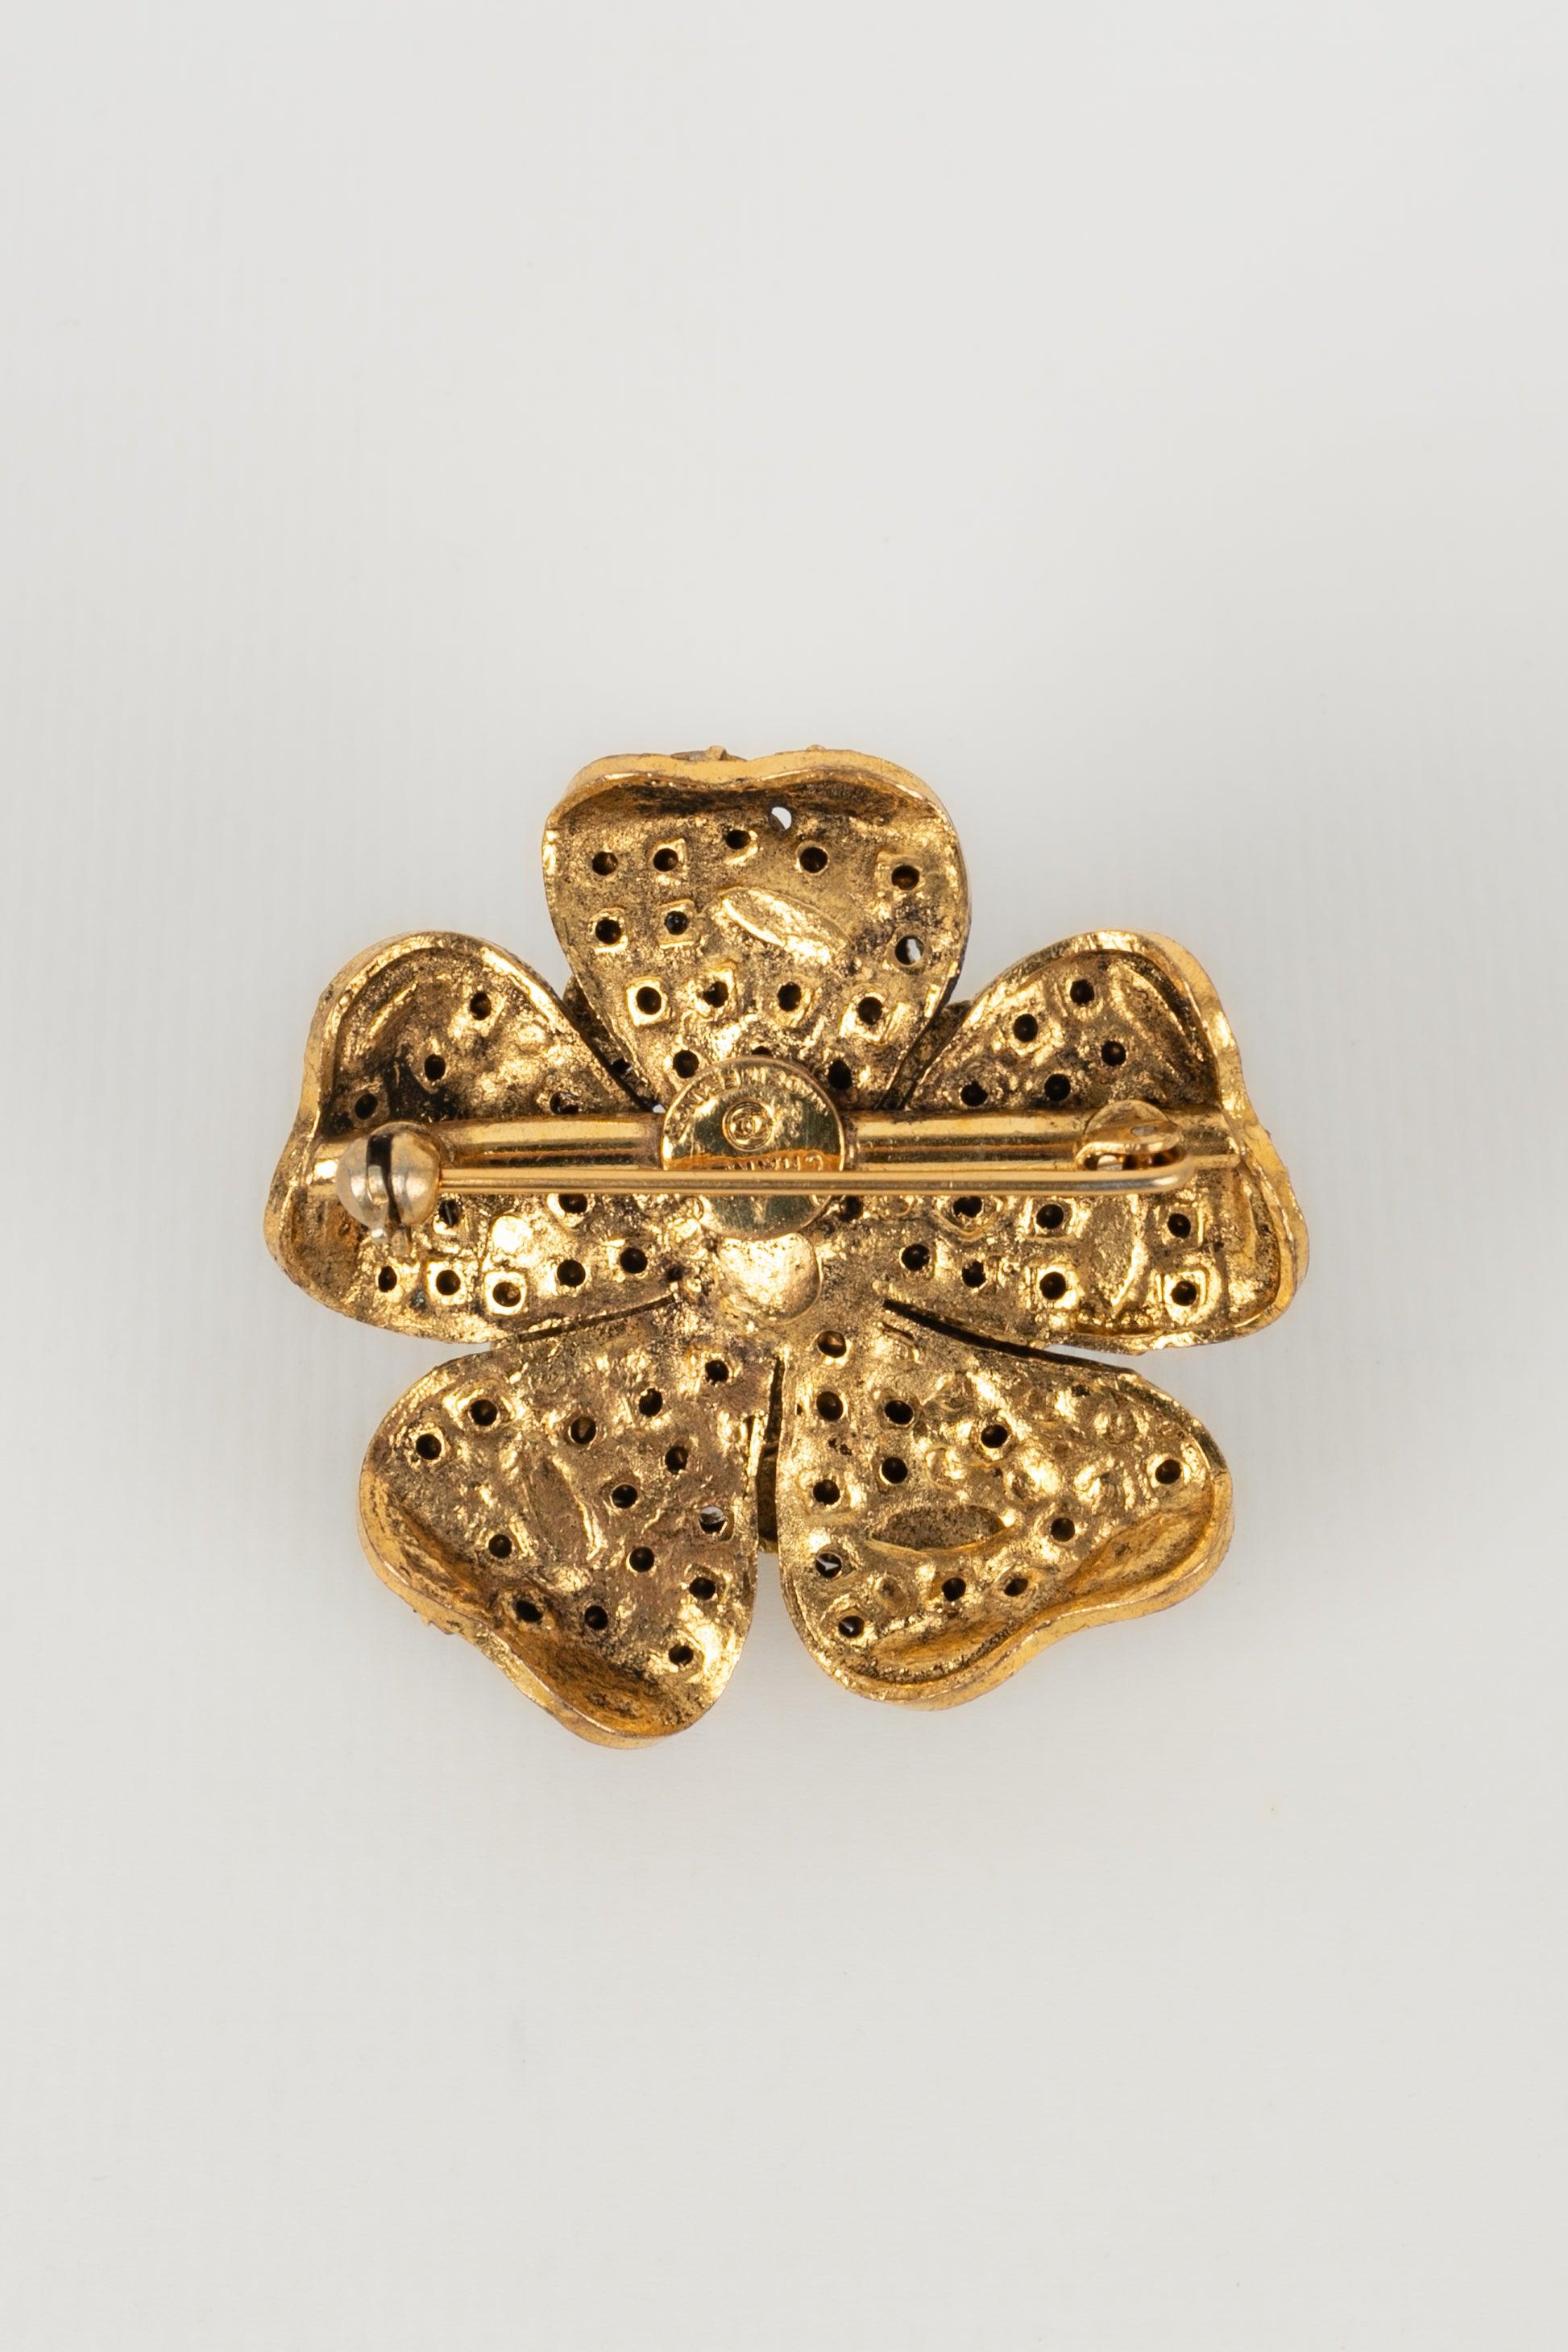 Chanel Golden Metal Brooch Ornamented with Rhinestones For Sale 2